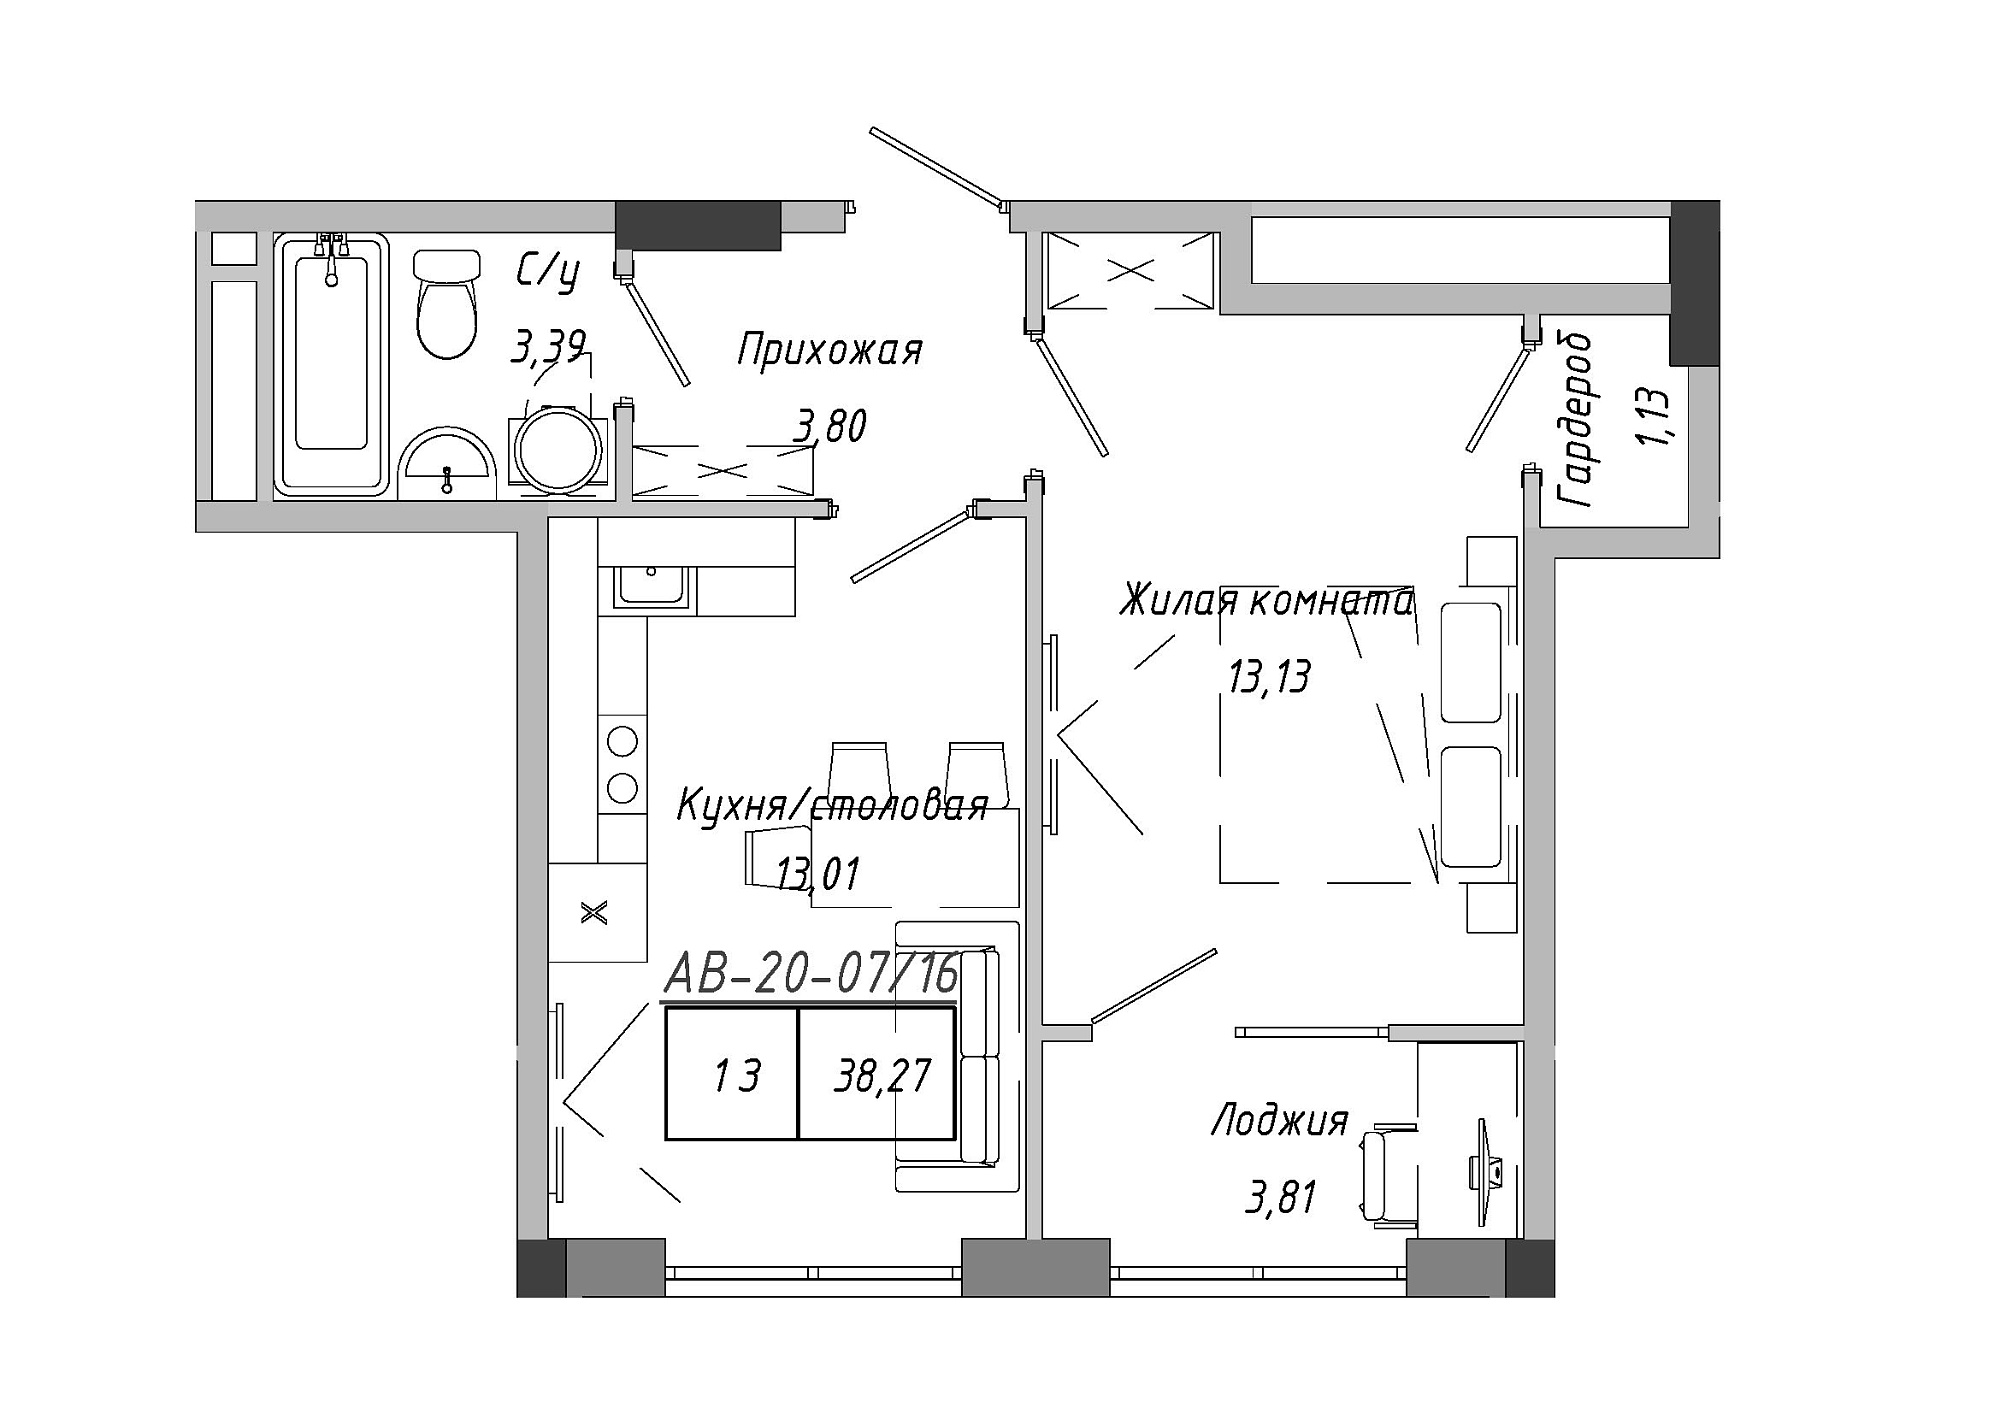 Planning 1-rm flats area 38.79m2, AB-20-07/00016.